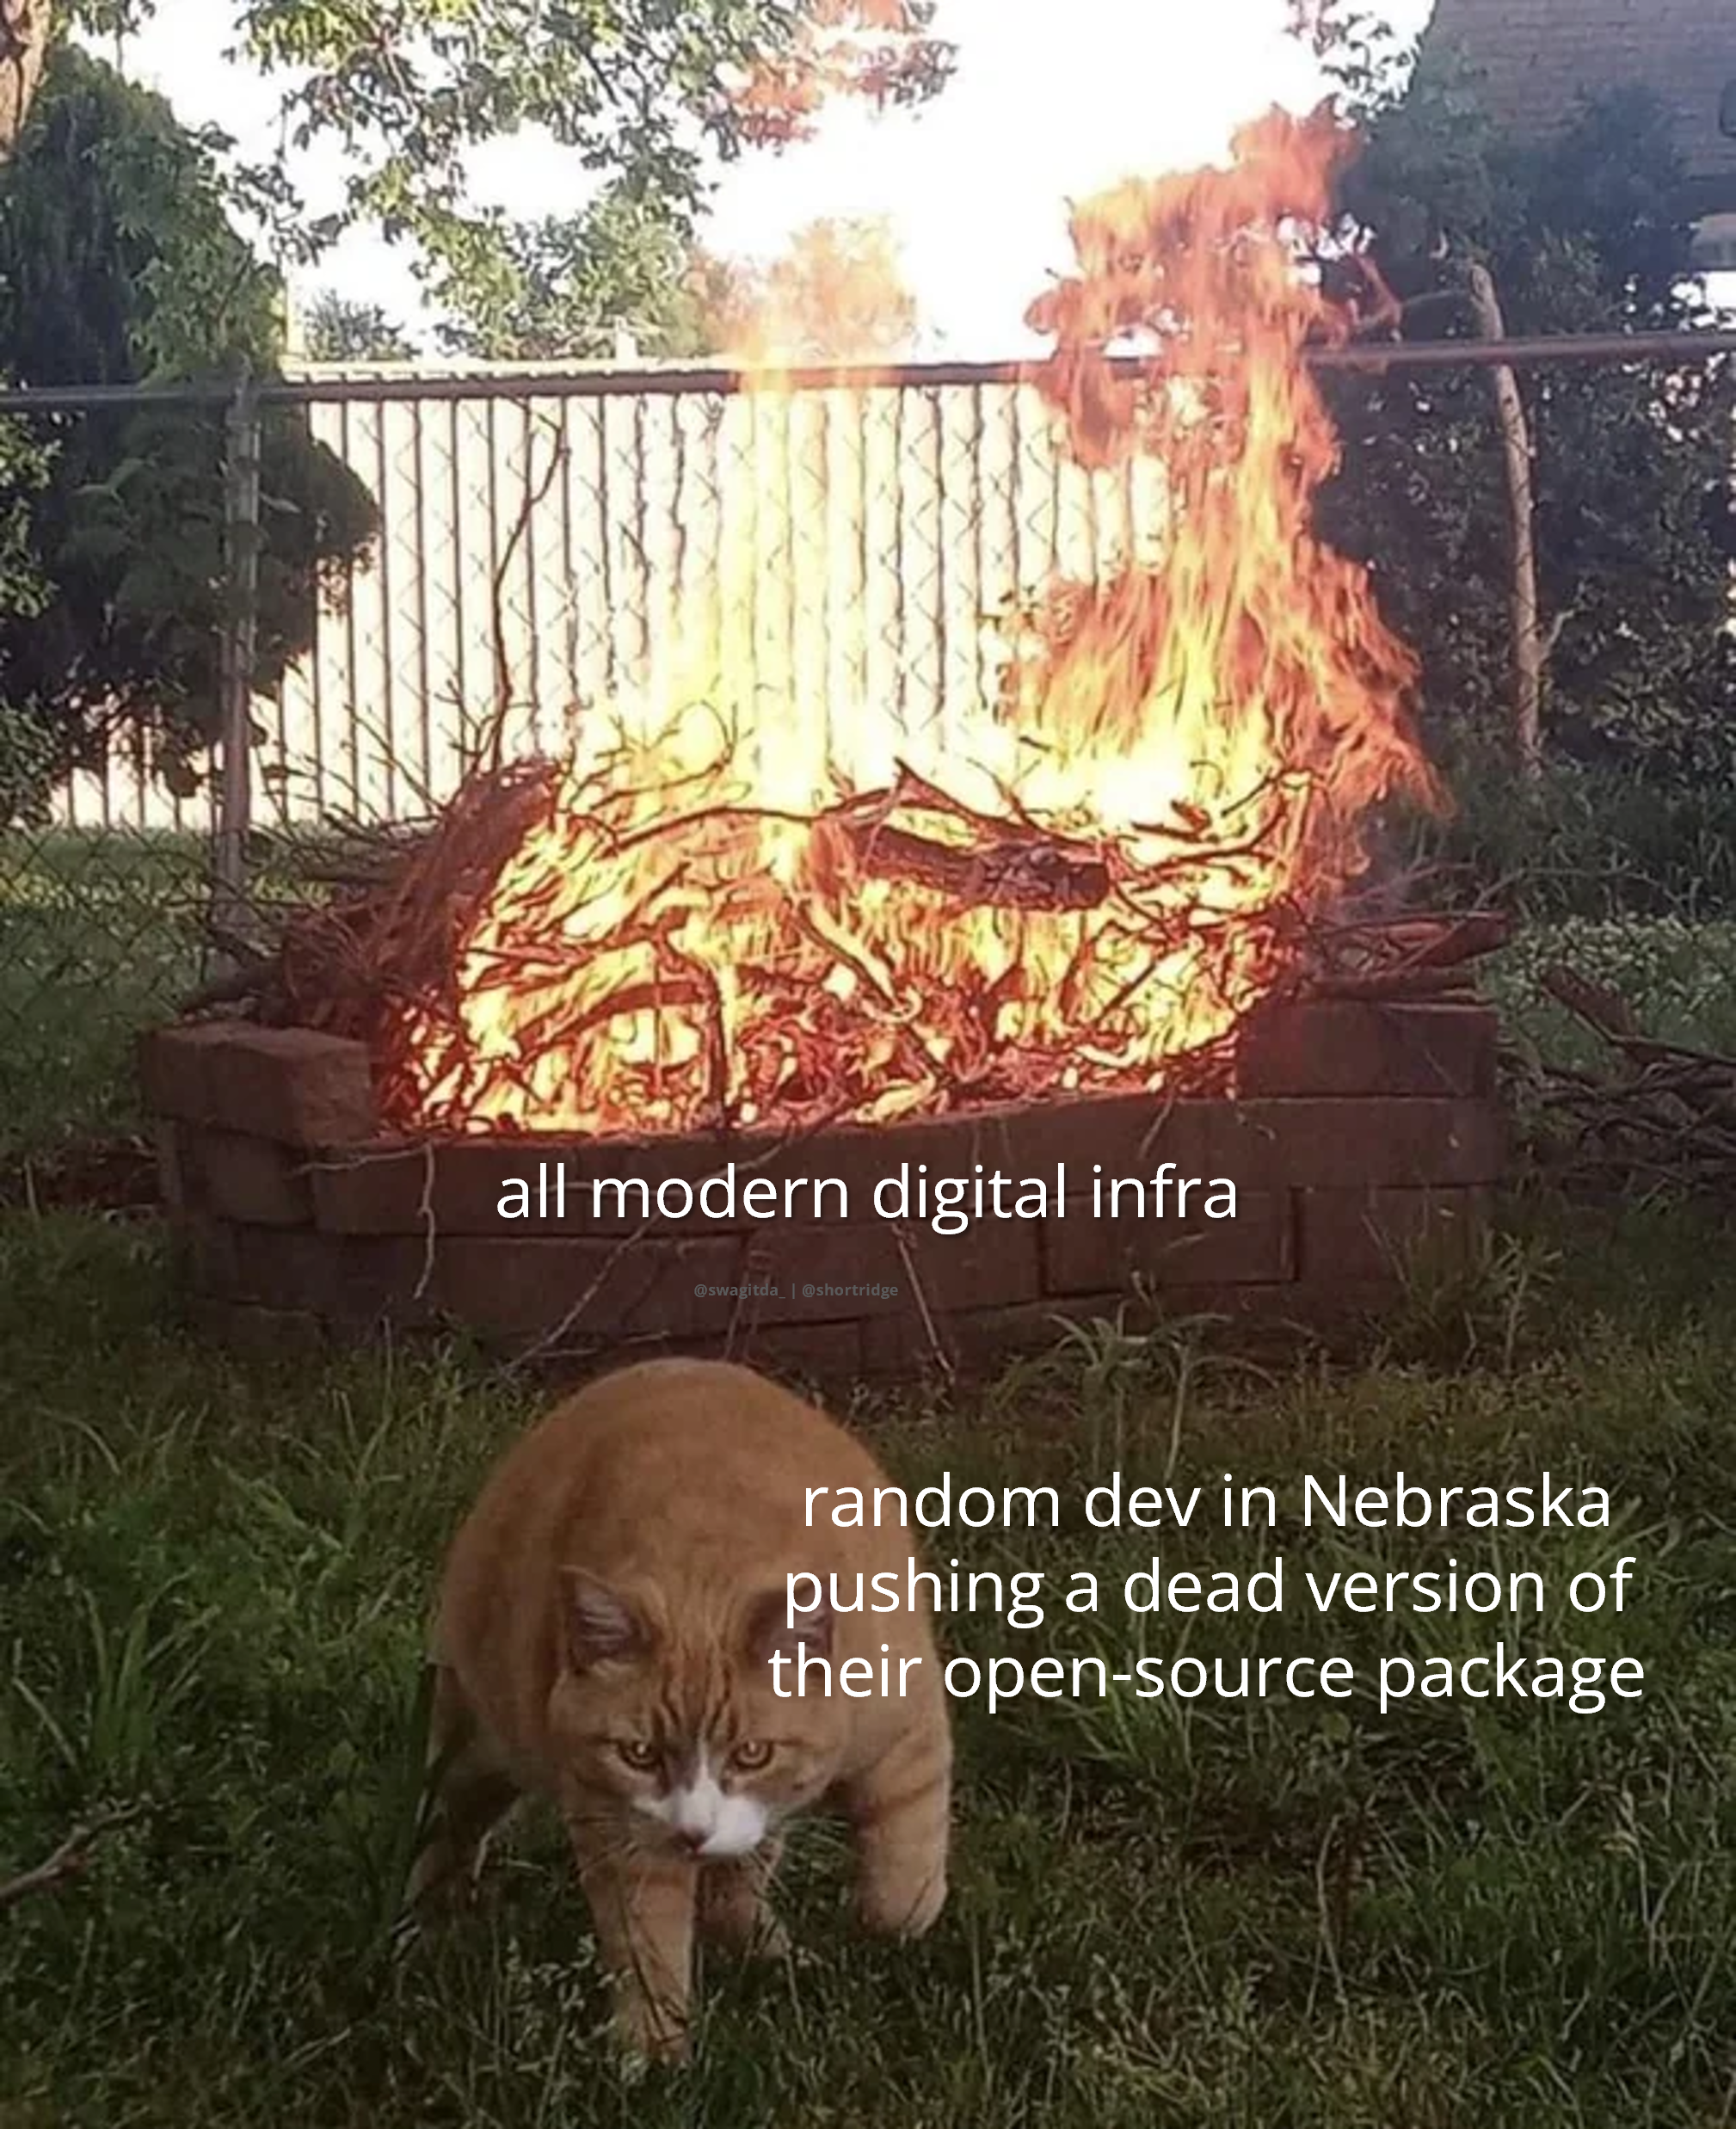 A photograph of a ginger cat sauntering away from a large fire behind it. The cat is labeled: random dev in Nebraska pushing a dead version of their open-source package. The fire is labeled: all modern digital infra.